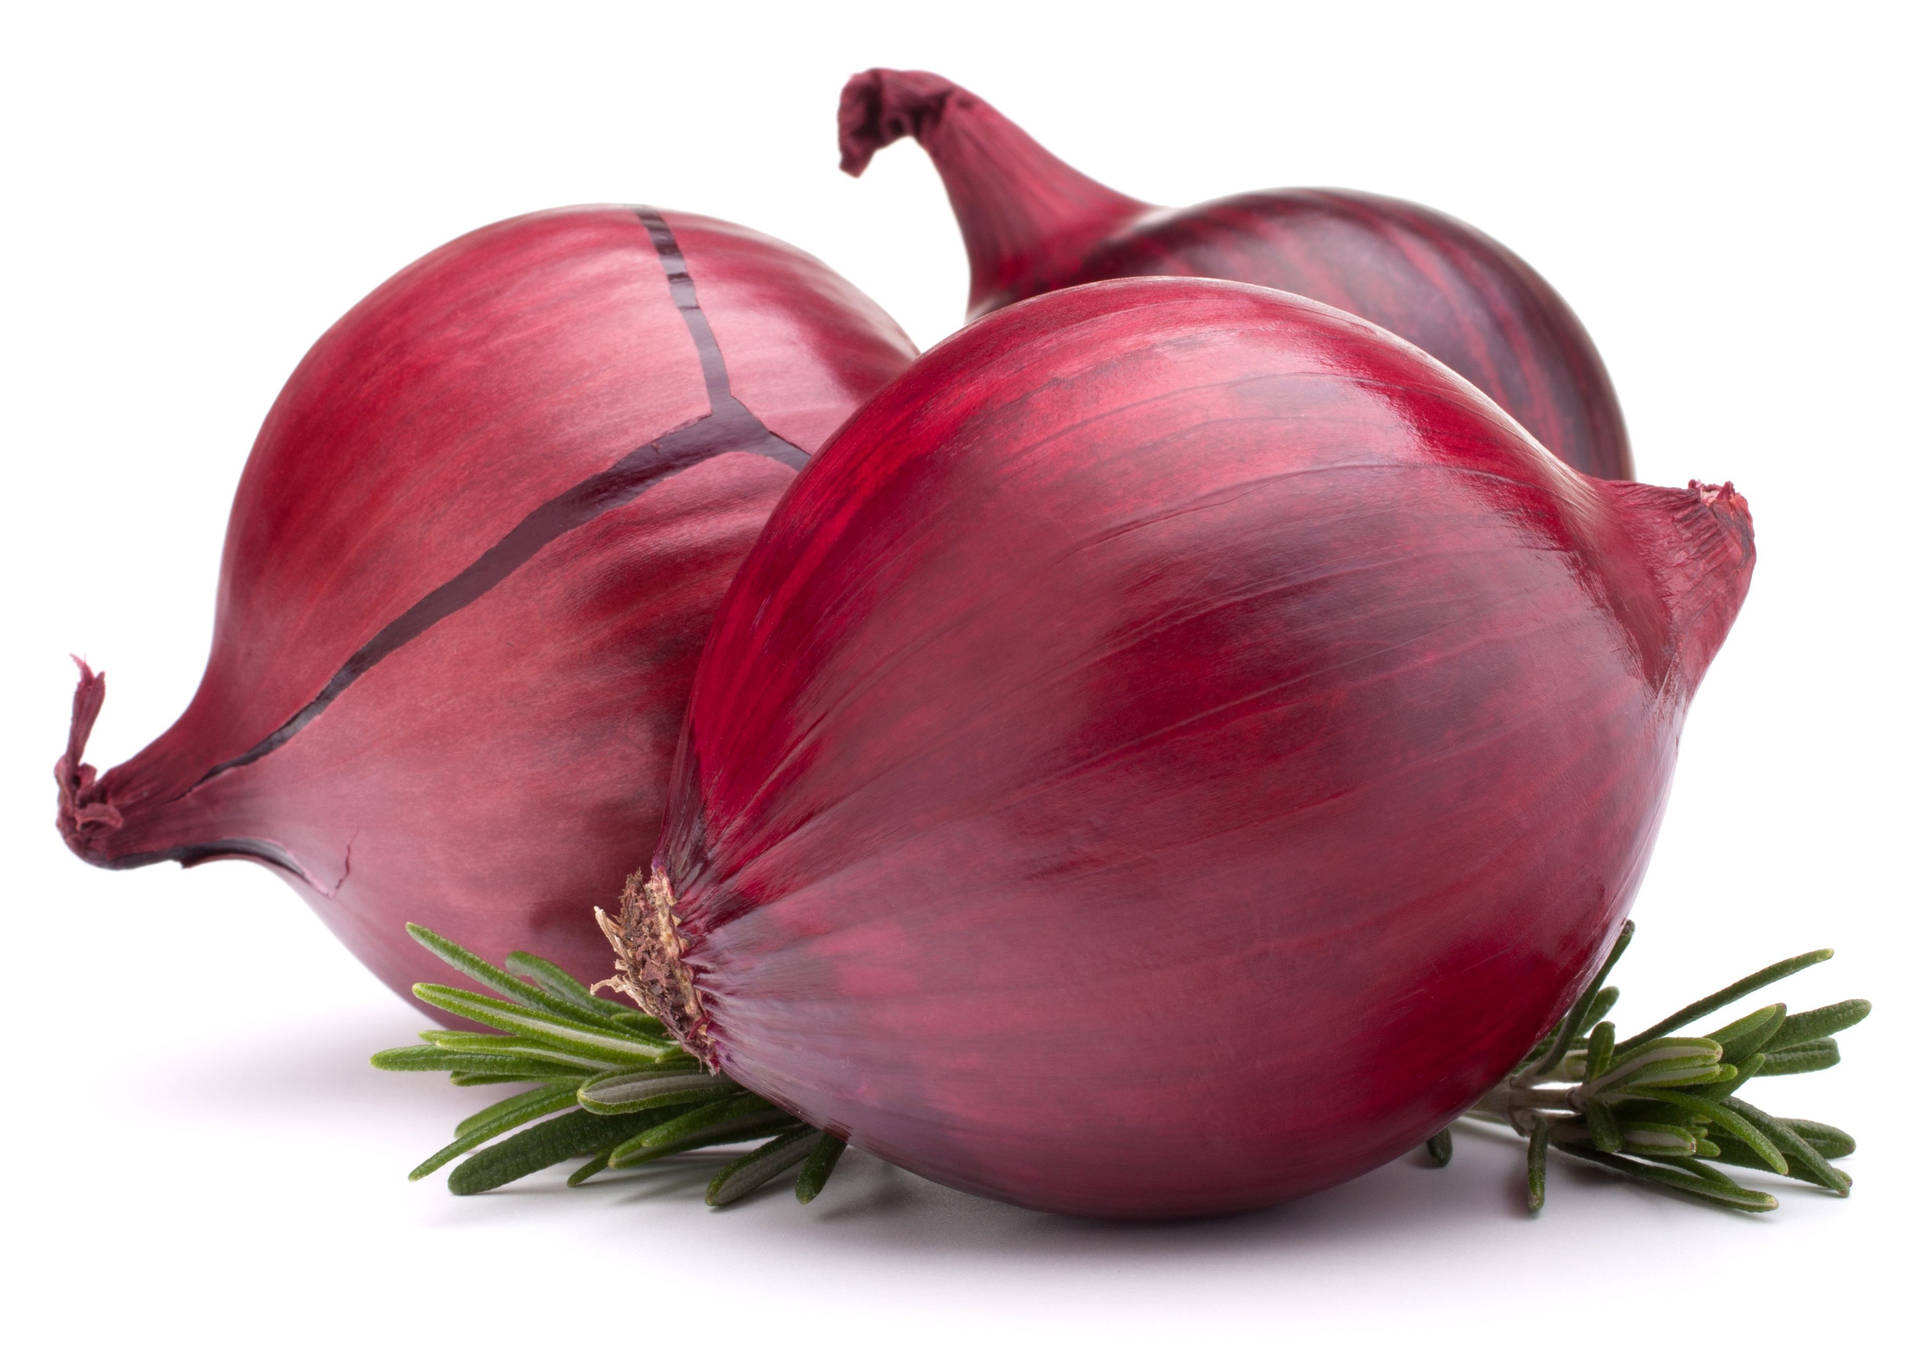 Onion Pictures Wallpaper